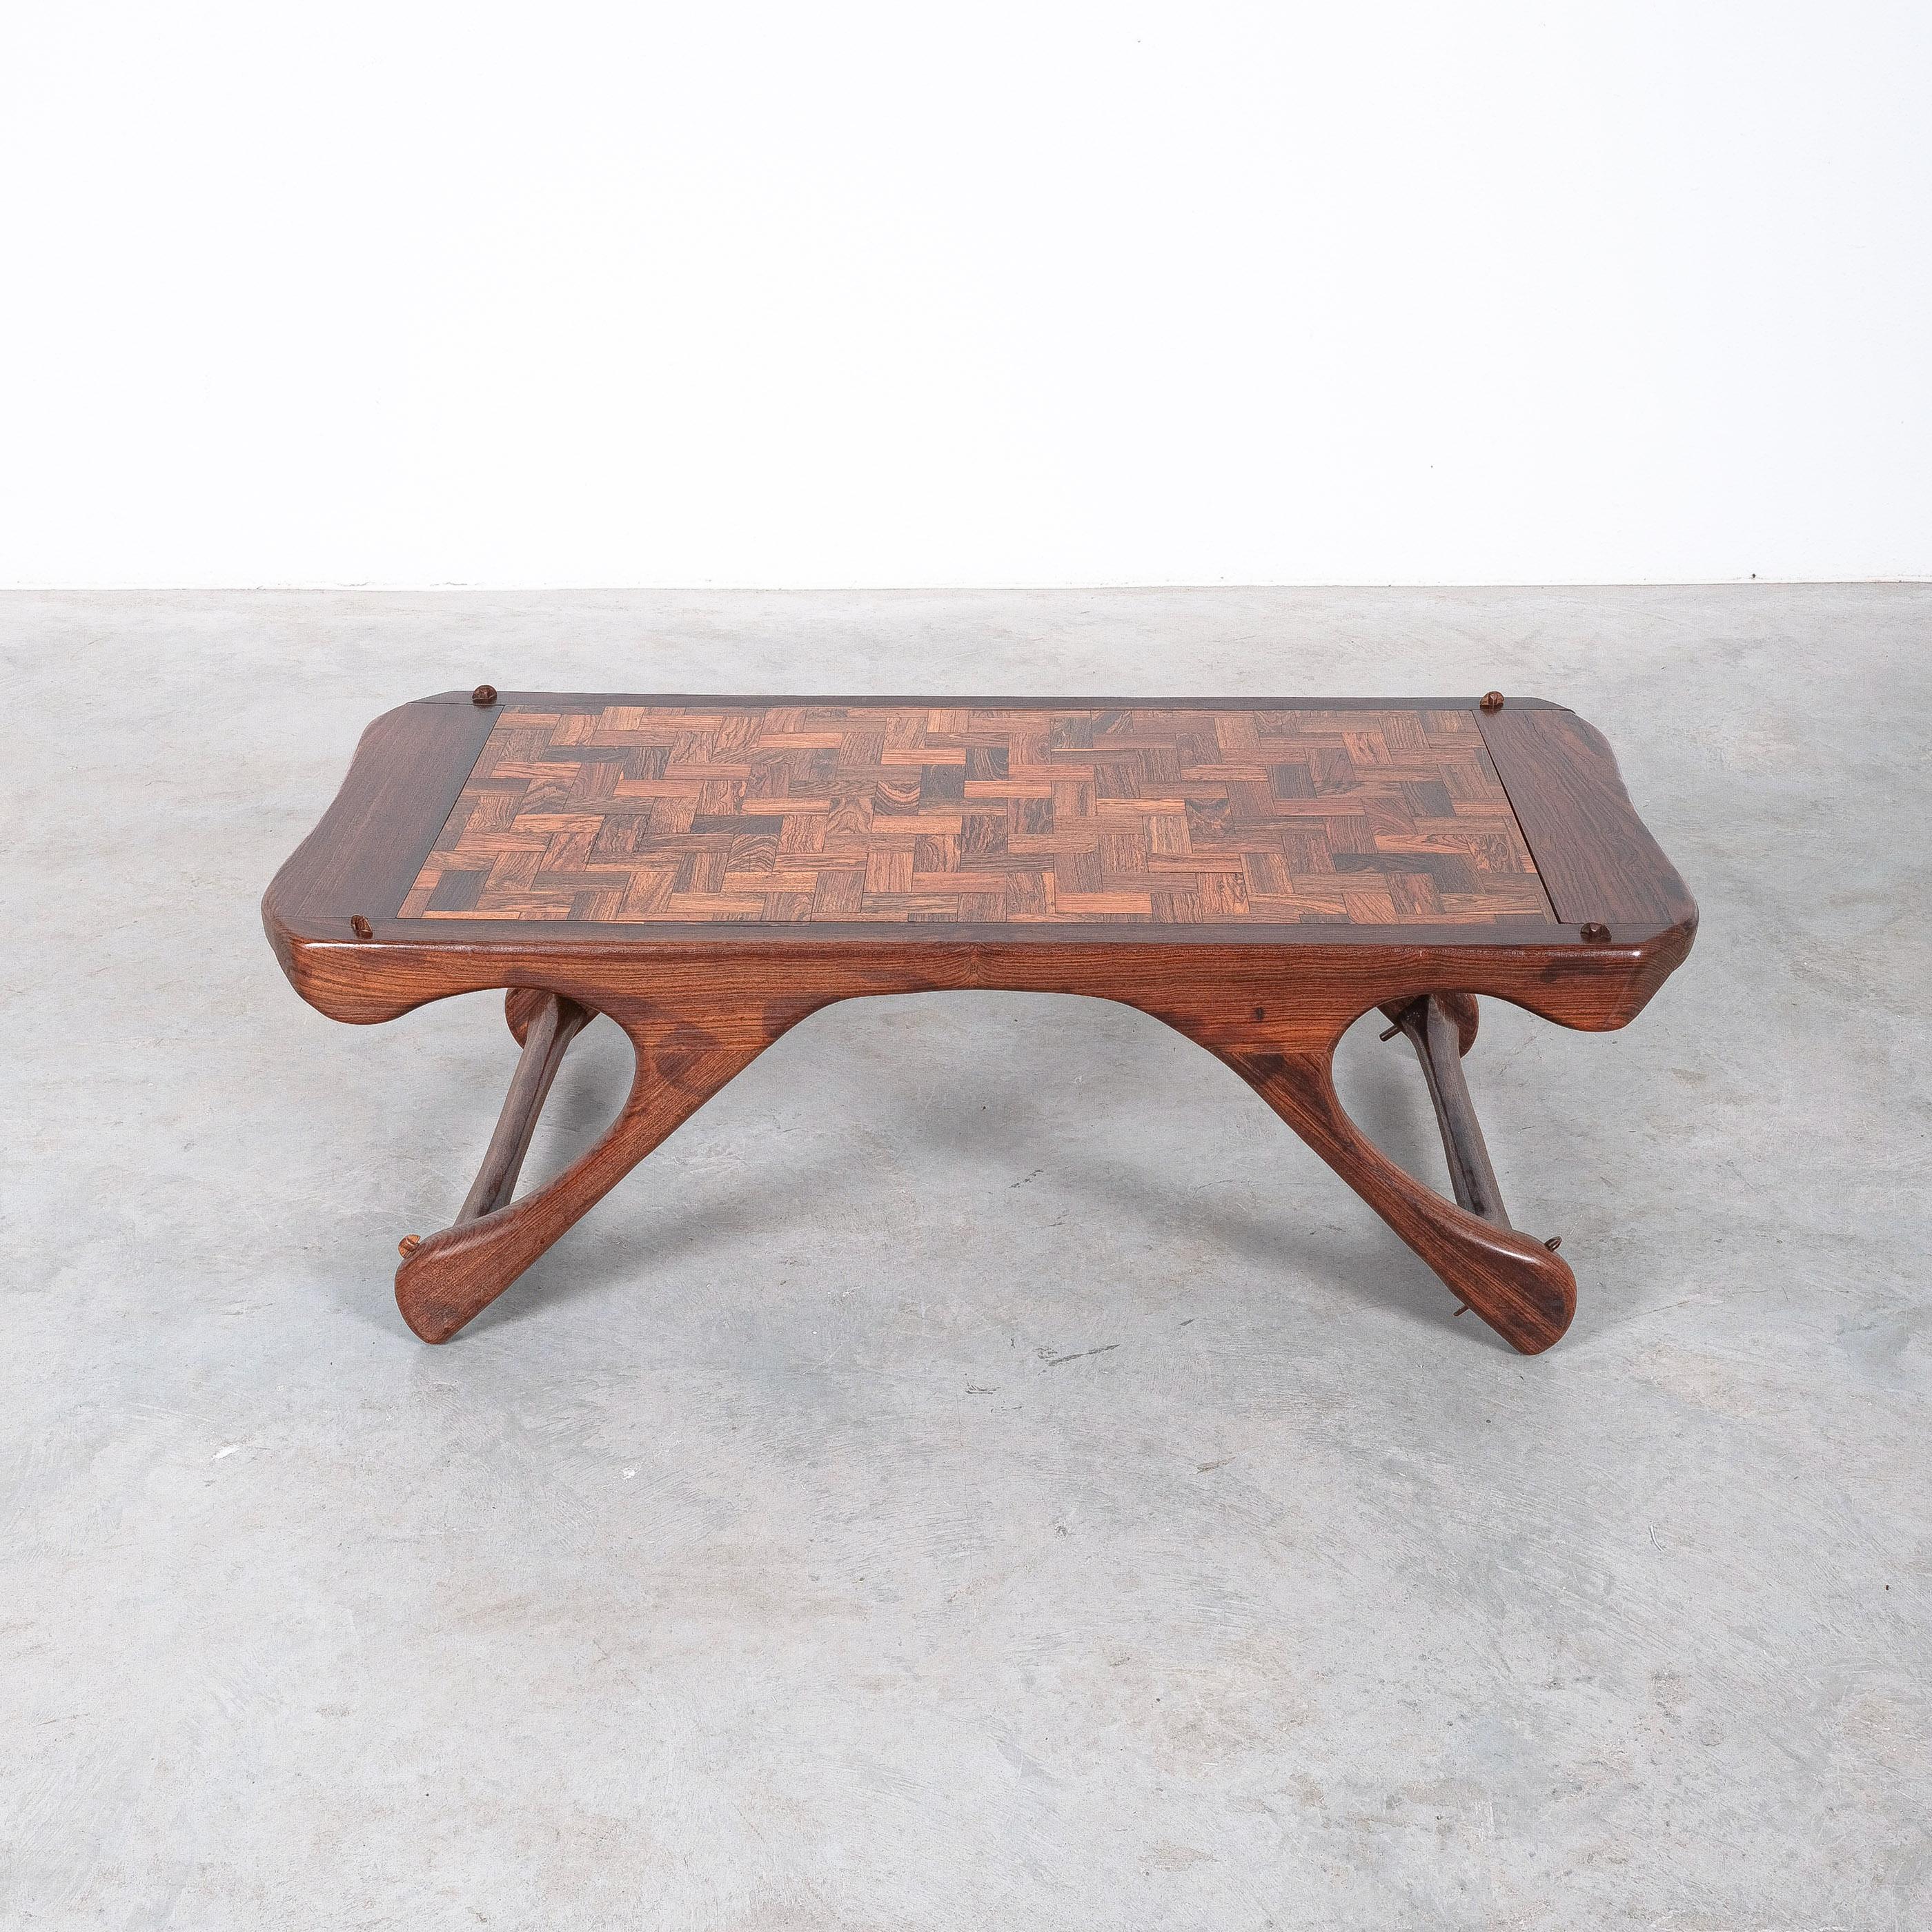 Rare parquetry rosewood table in wonderful condition, Don Shoemaker 1960

We also have a rare sofa available from Don Shoemaker.

A sculptural masterpiece by Don Shoemaker. We have this table in our collection at the moment together with a matching